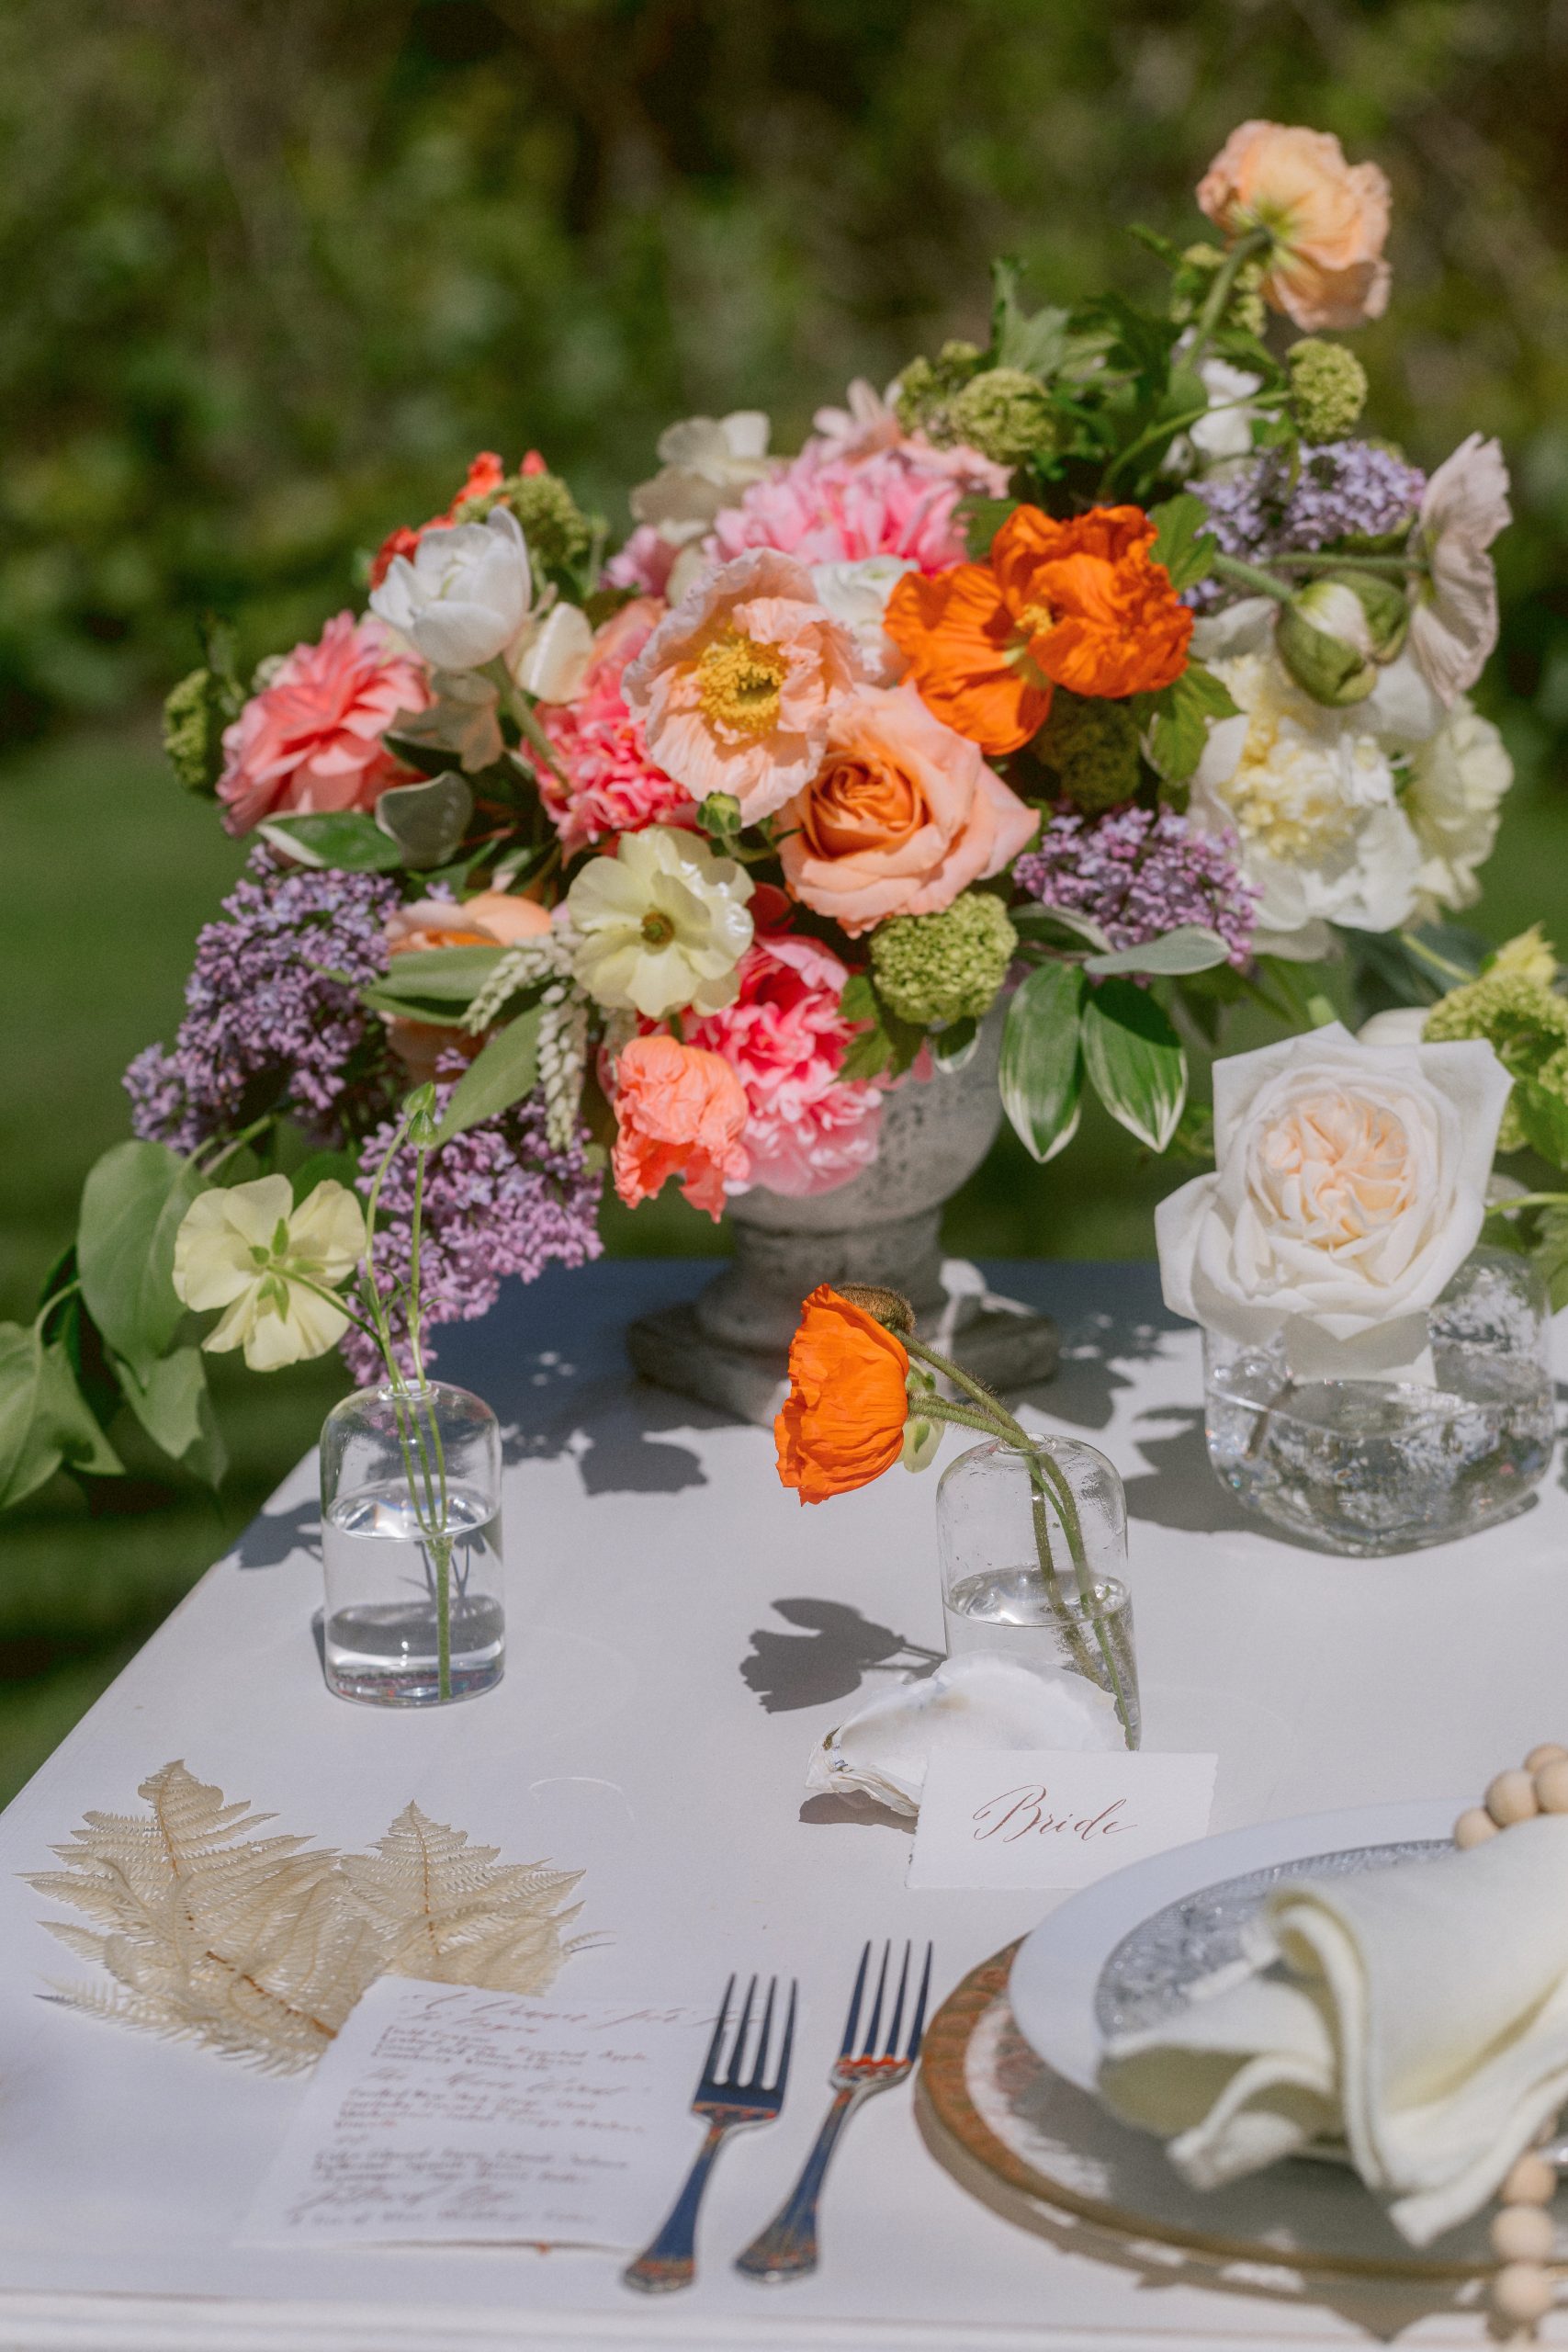 A multicolored bouquet on a white linen tablecloth